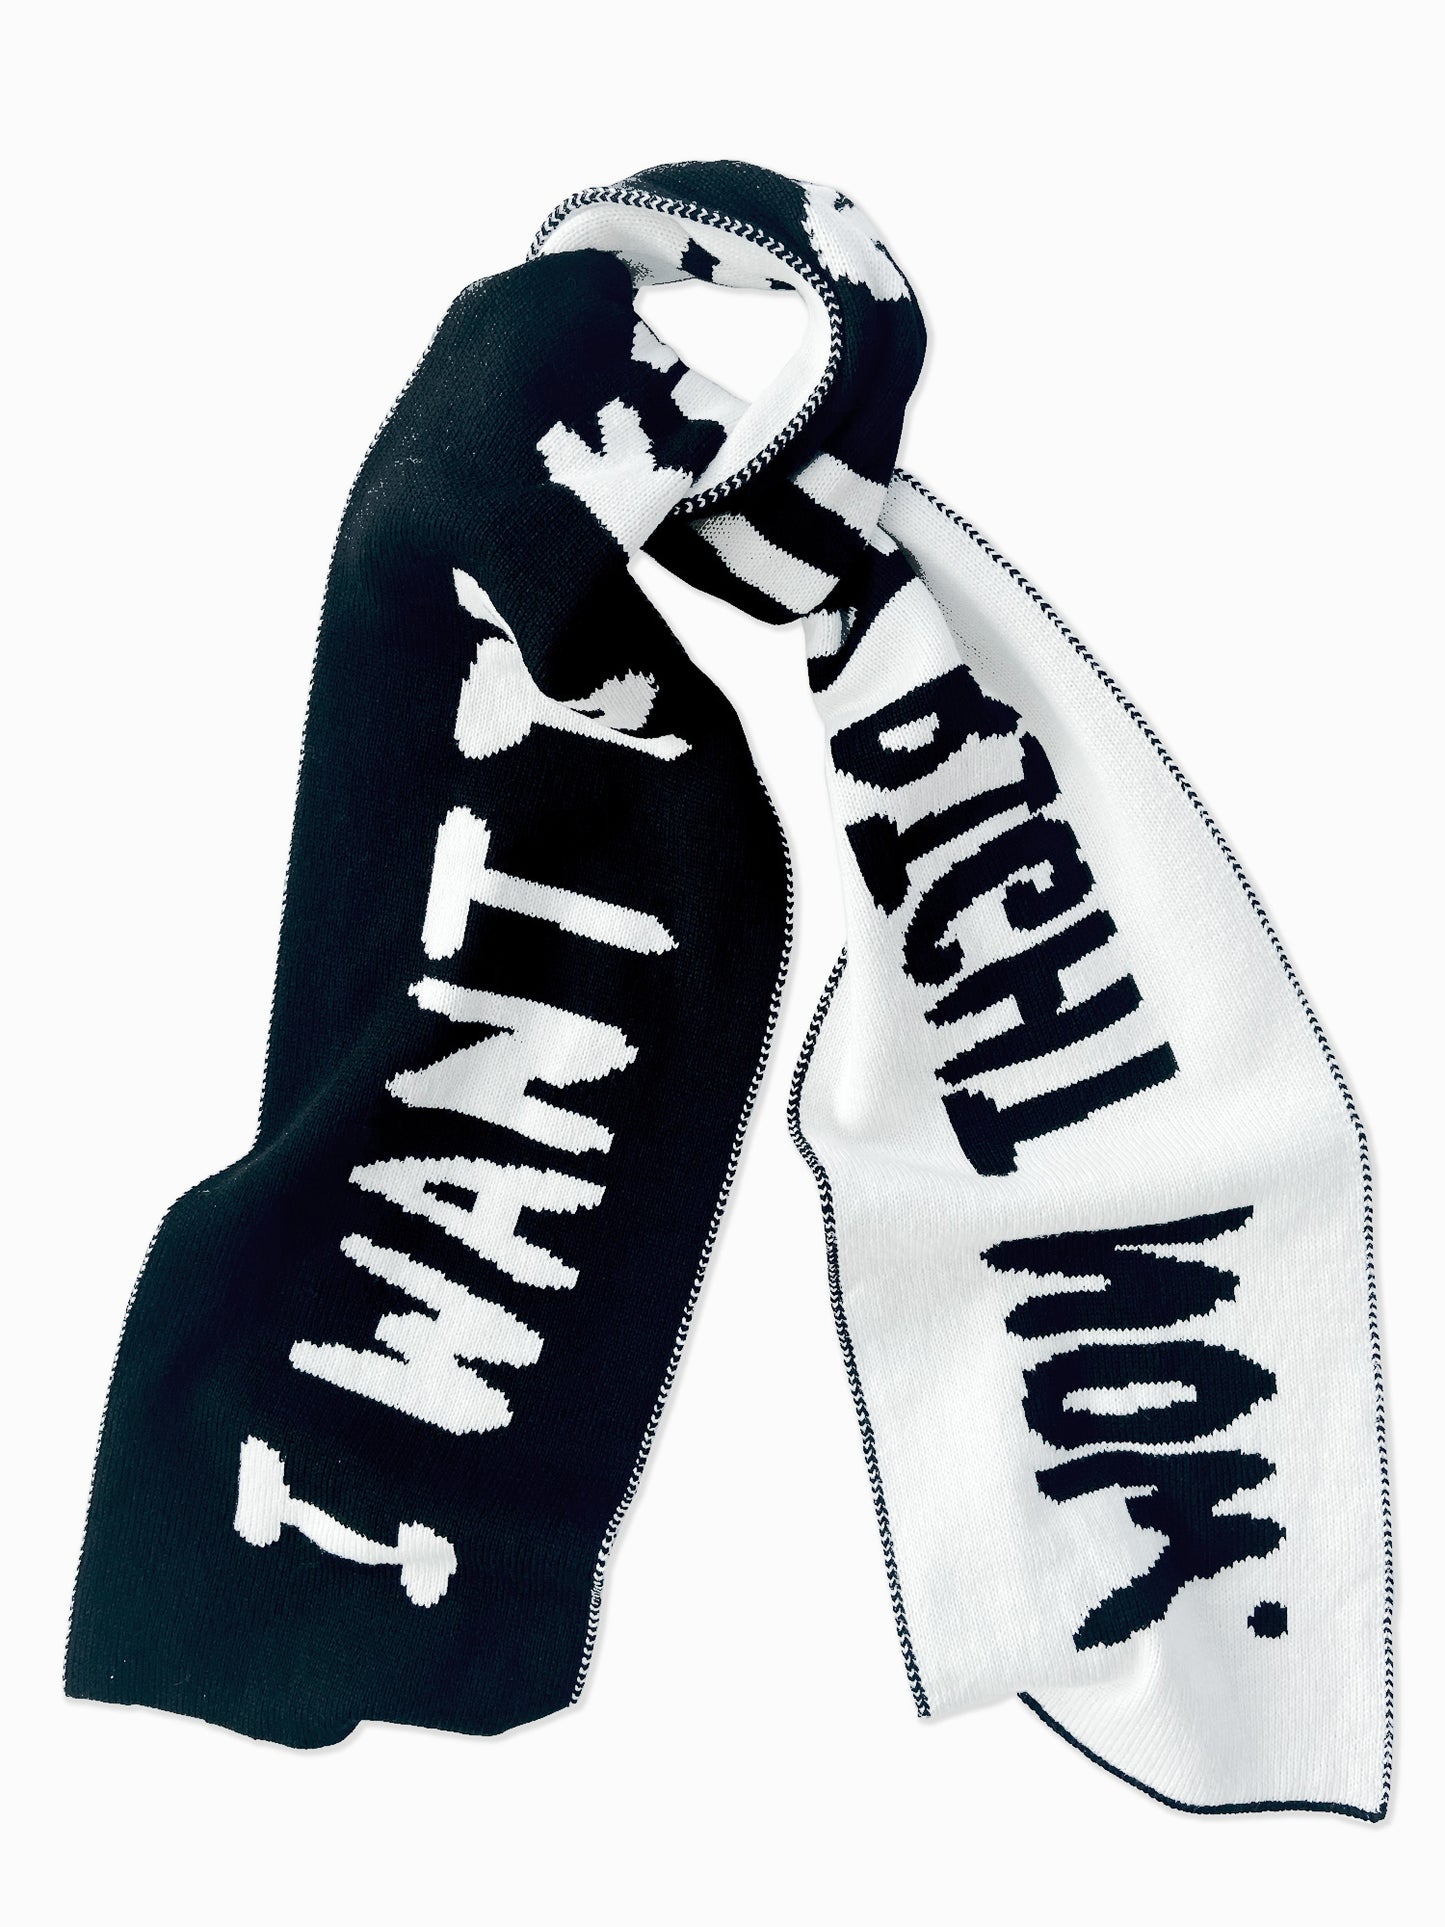 Kiss Slogan Wool and Cashmere Scarf